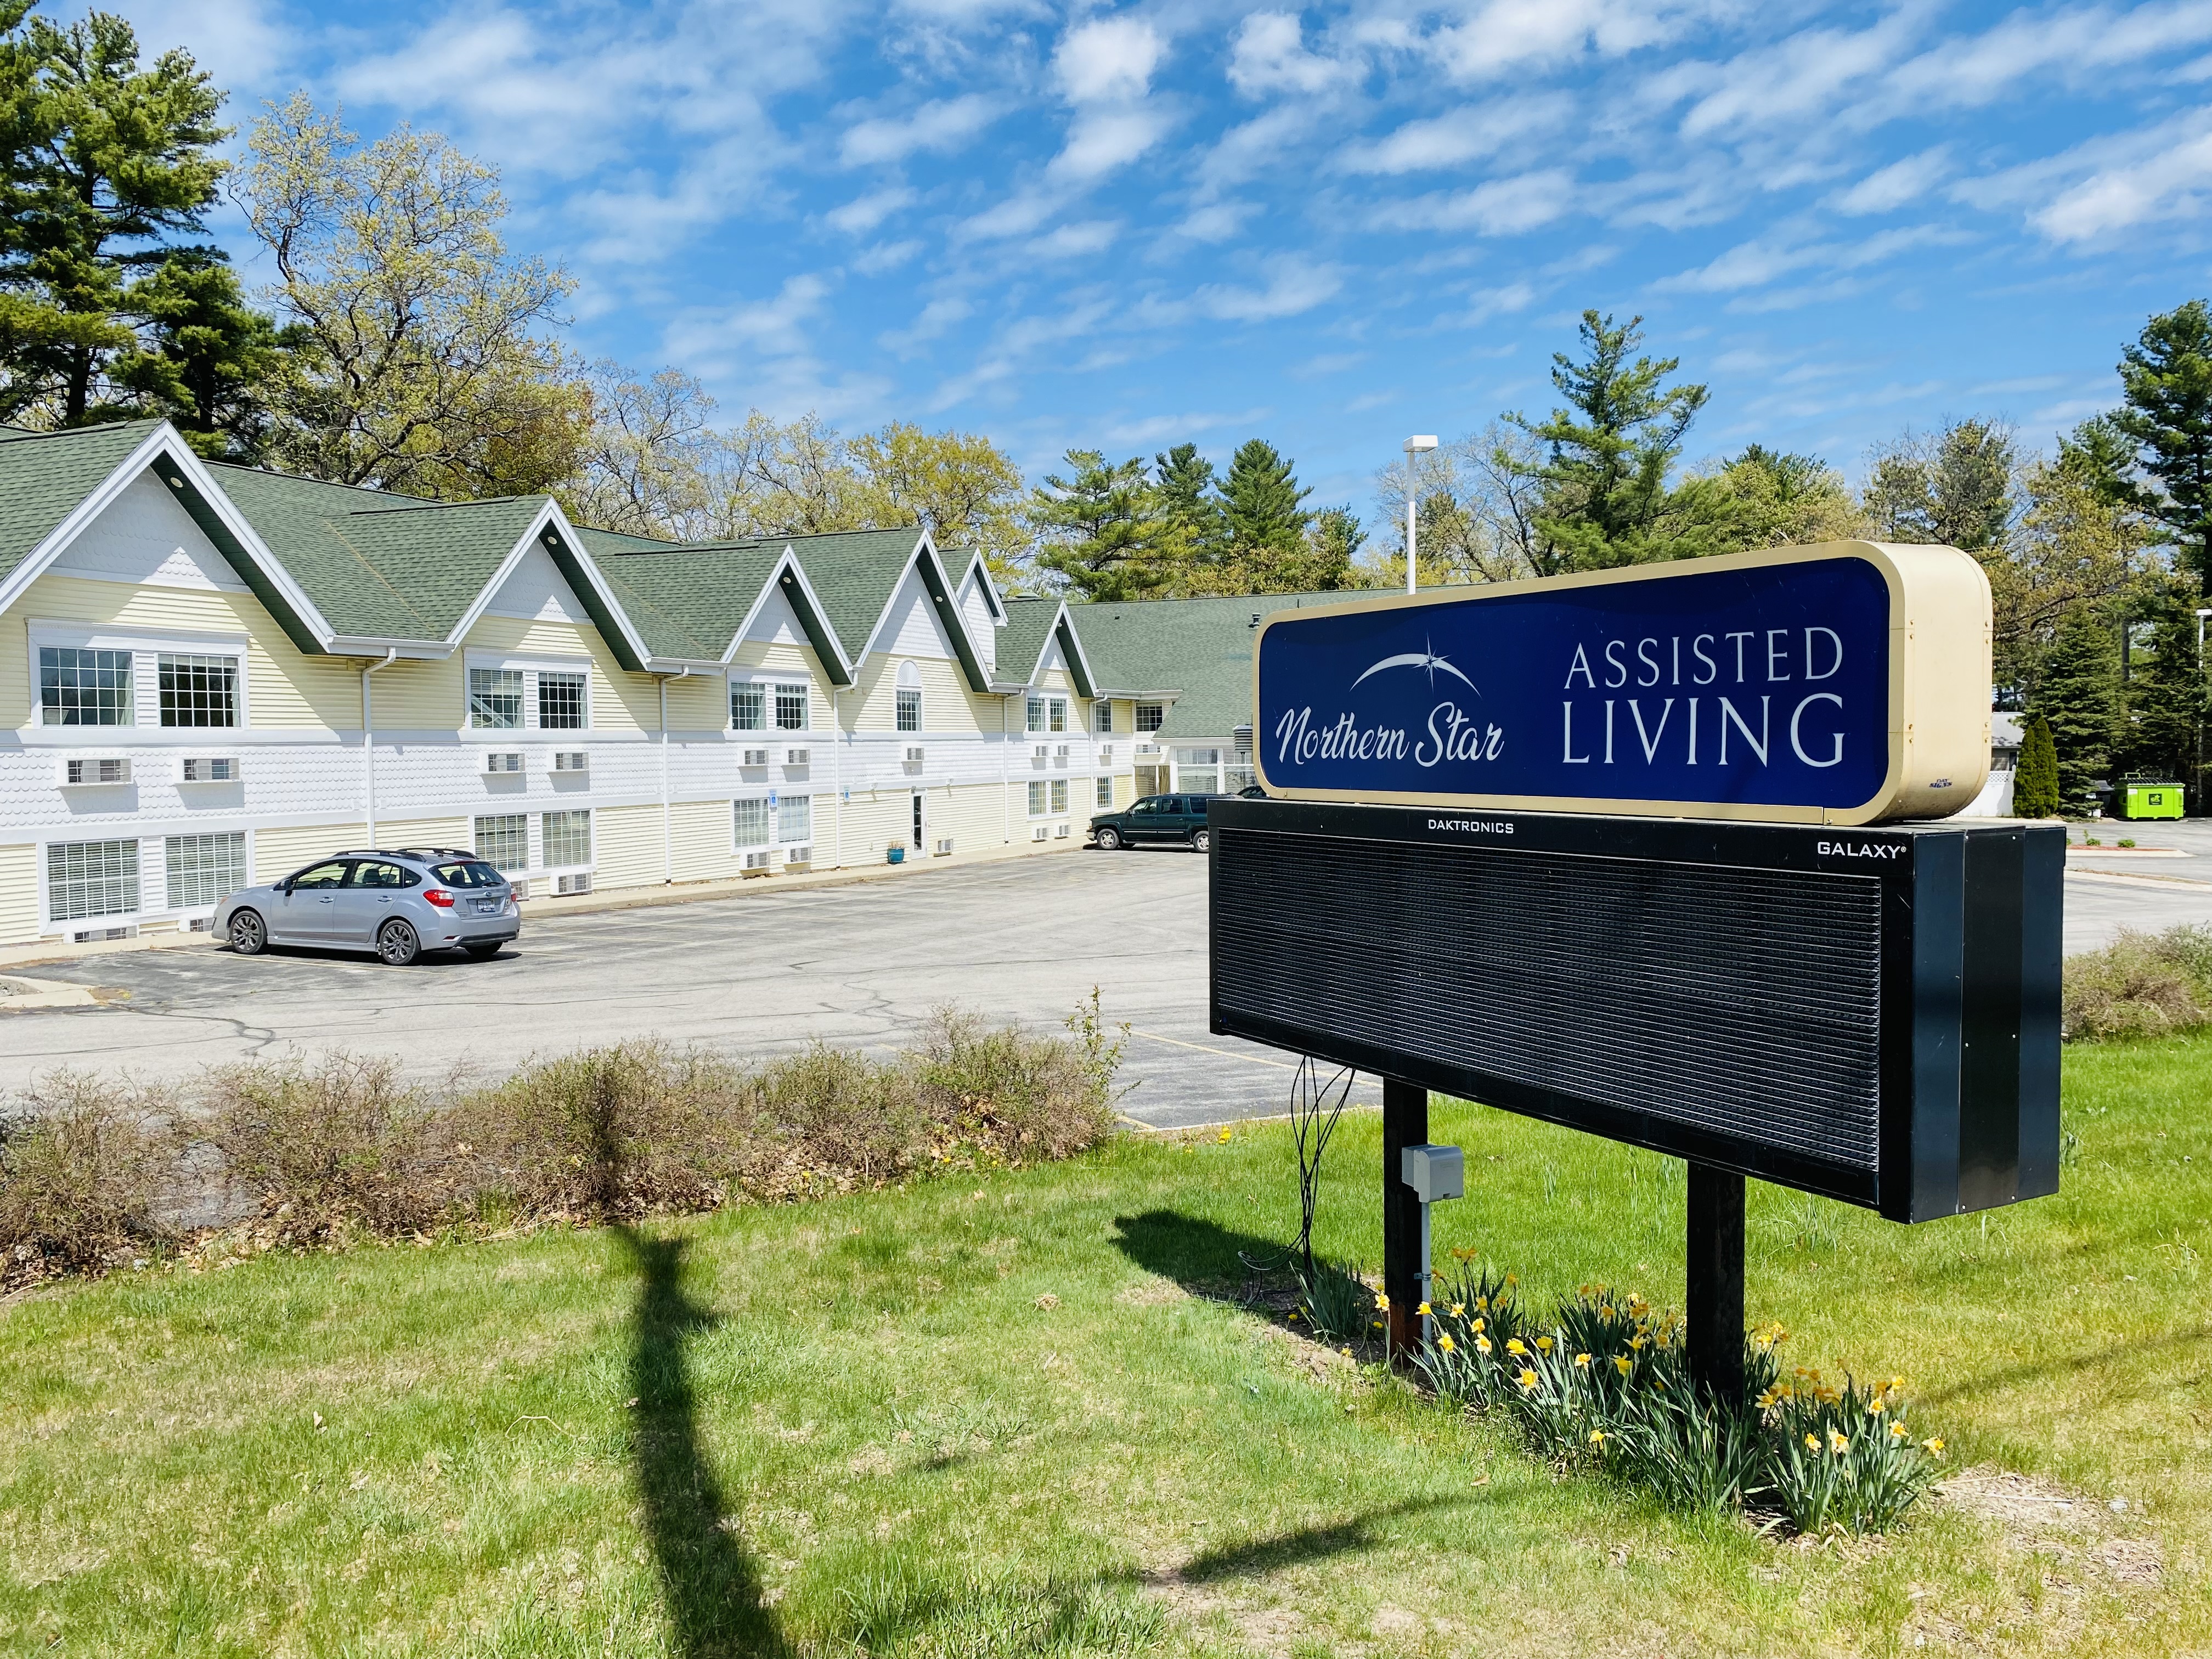 New Senior Living Facilities Are Under Construction In Traverse City; Can The Local Workforce Support Them?